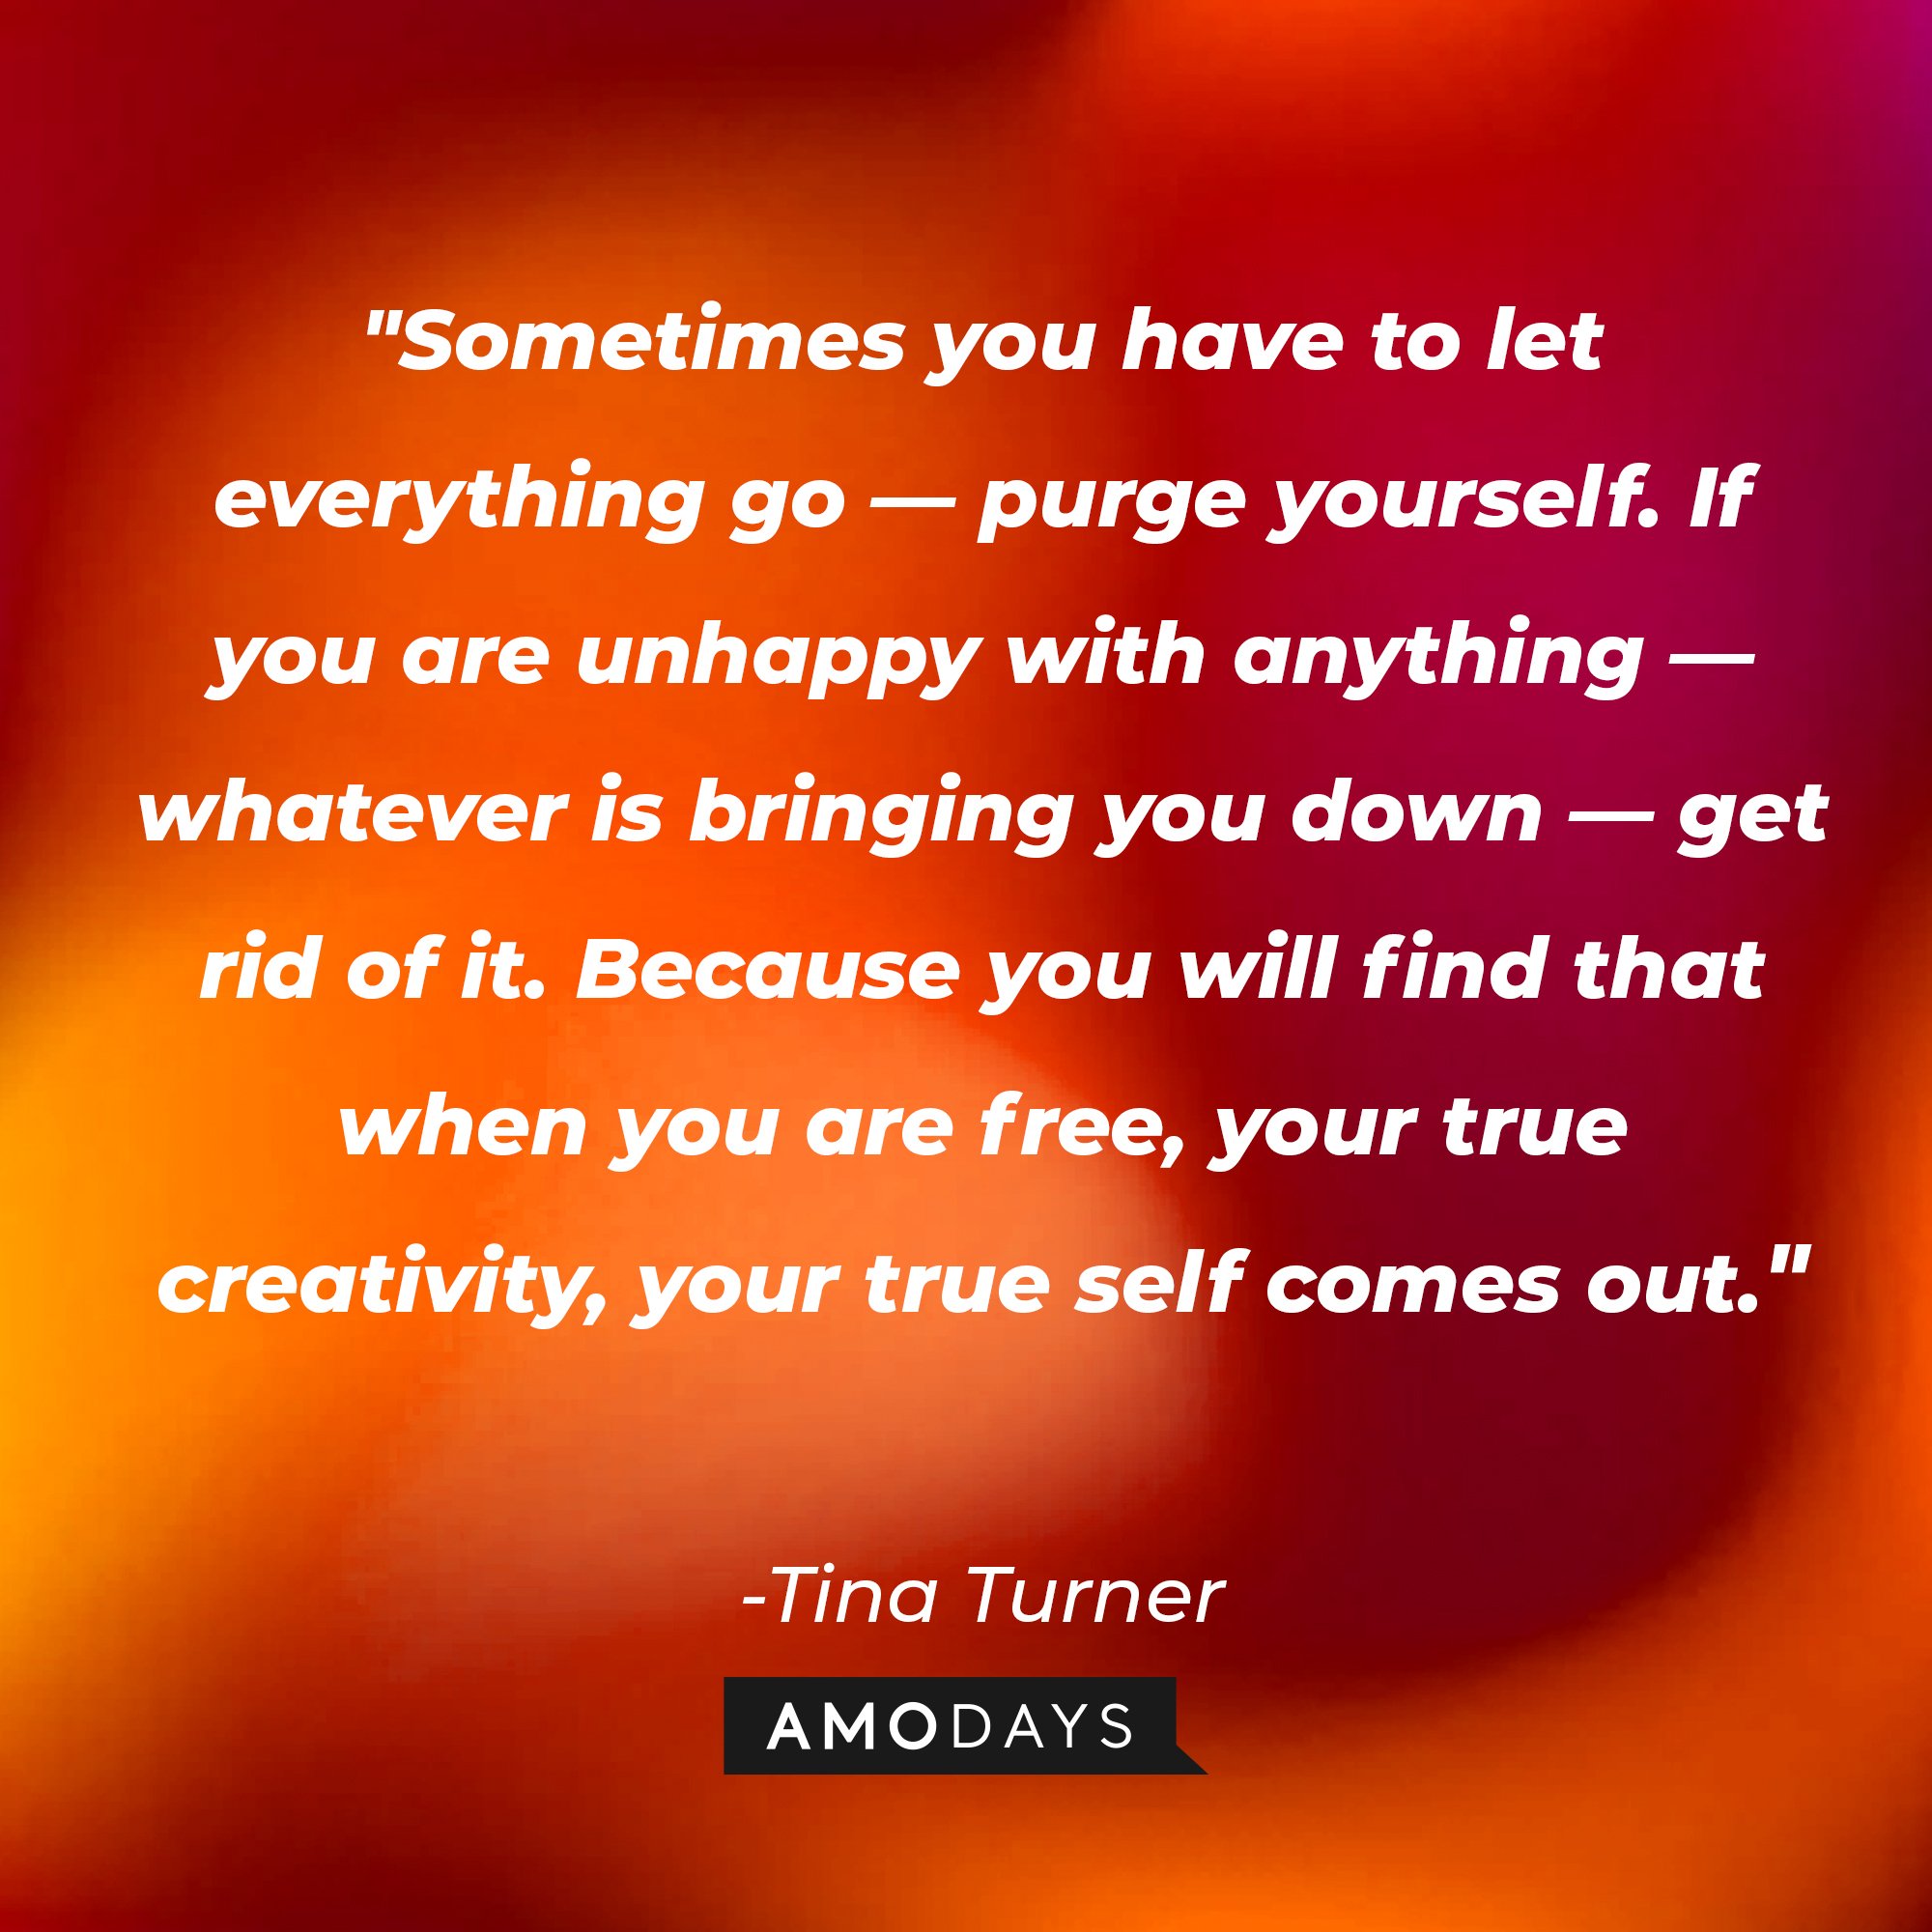 Tina Turner’s quote: "Sometimes you have to let everything go—purge yourself. If you are unhappy with anything—whatever is bringing you down—get rid of it. Because you will find that when you are free, your true creativity, your true self comes out." | Image: AmoDays   